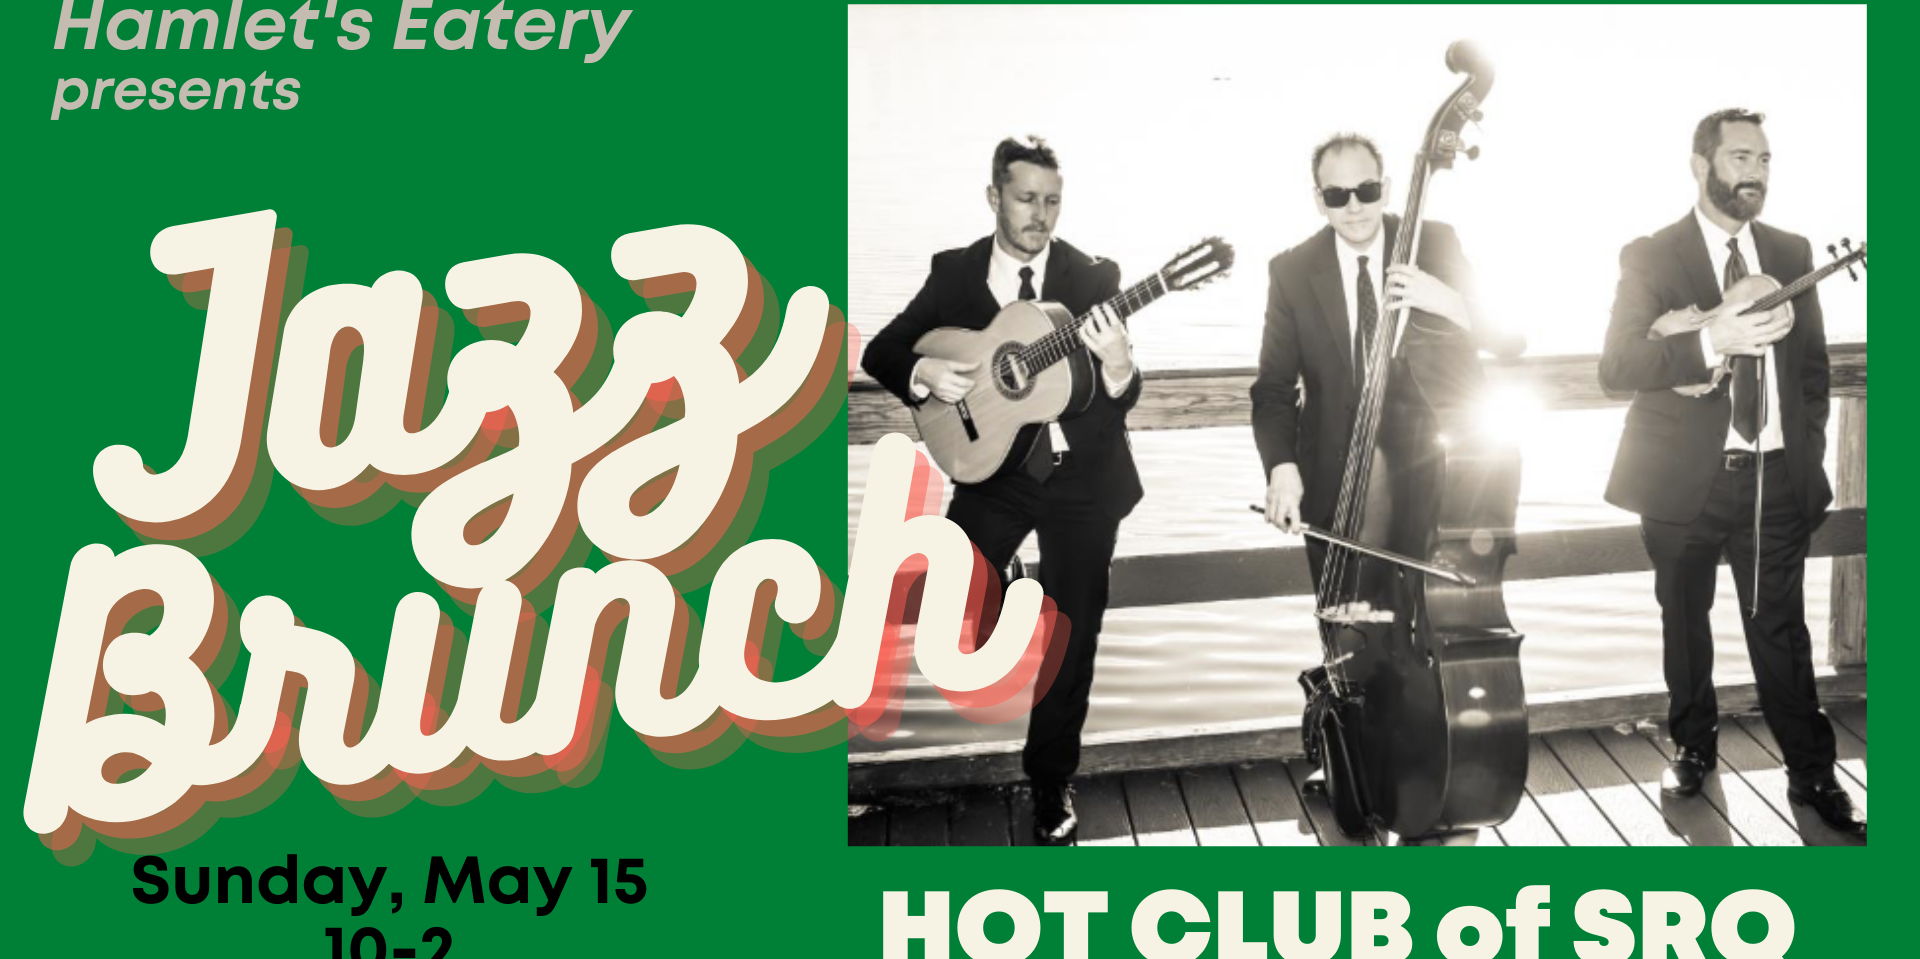 Jazz Brunch at Hamlet's Eatery with Hot Club of SRQ promotional image